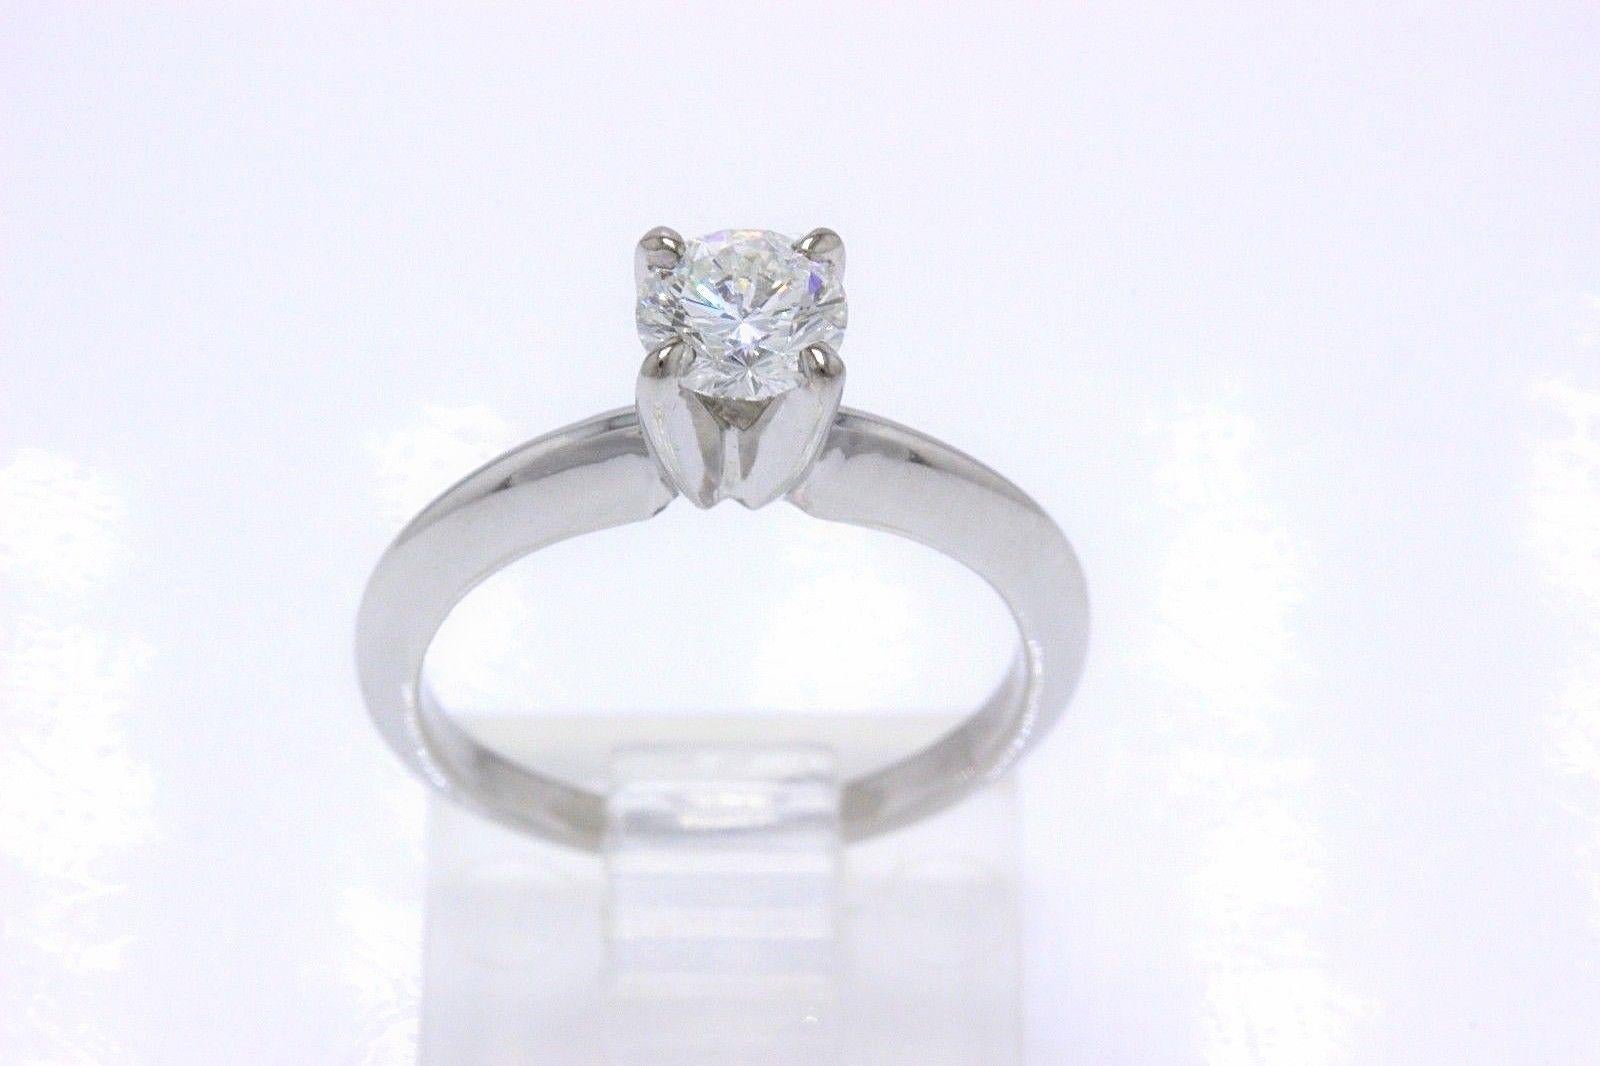 Leo Round Brilliant Diamond Engagement Ring 0.51 CTS I SI1 14K White Gold Papers In Excellent Condition For Sale In San Diego, CA